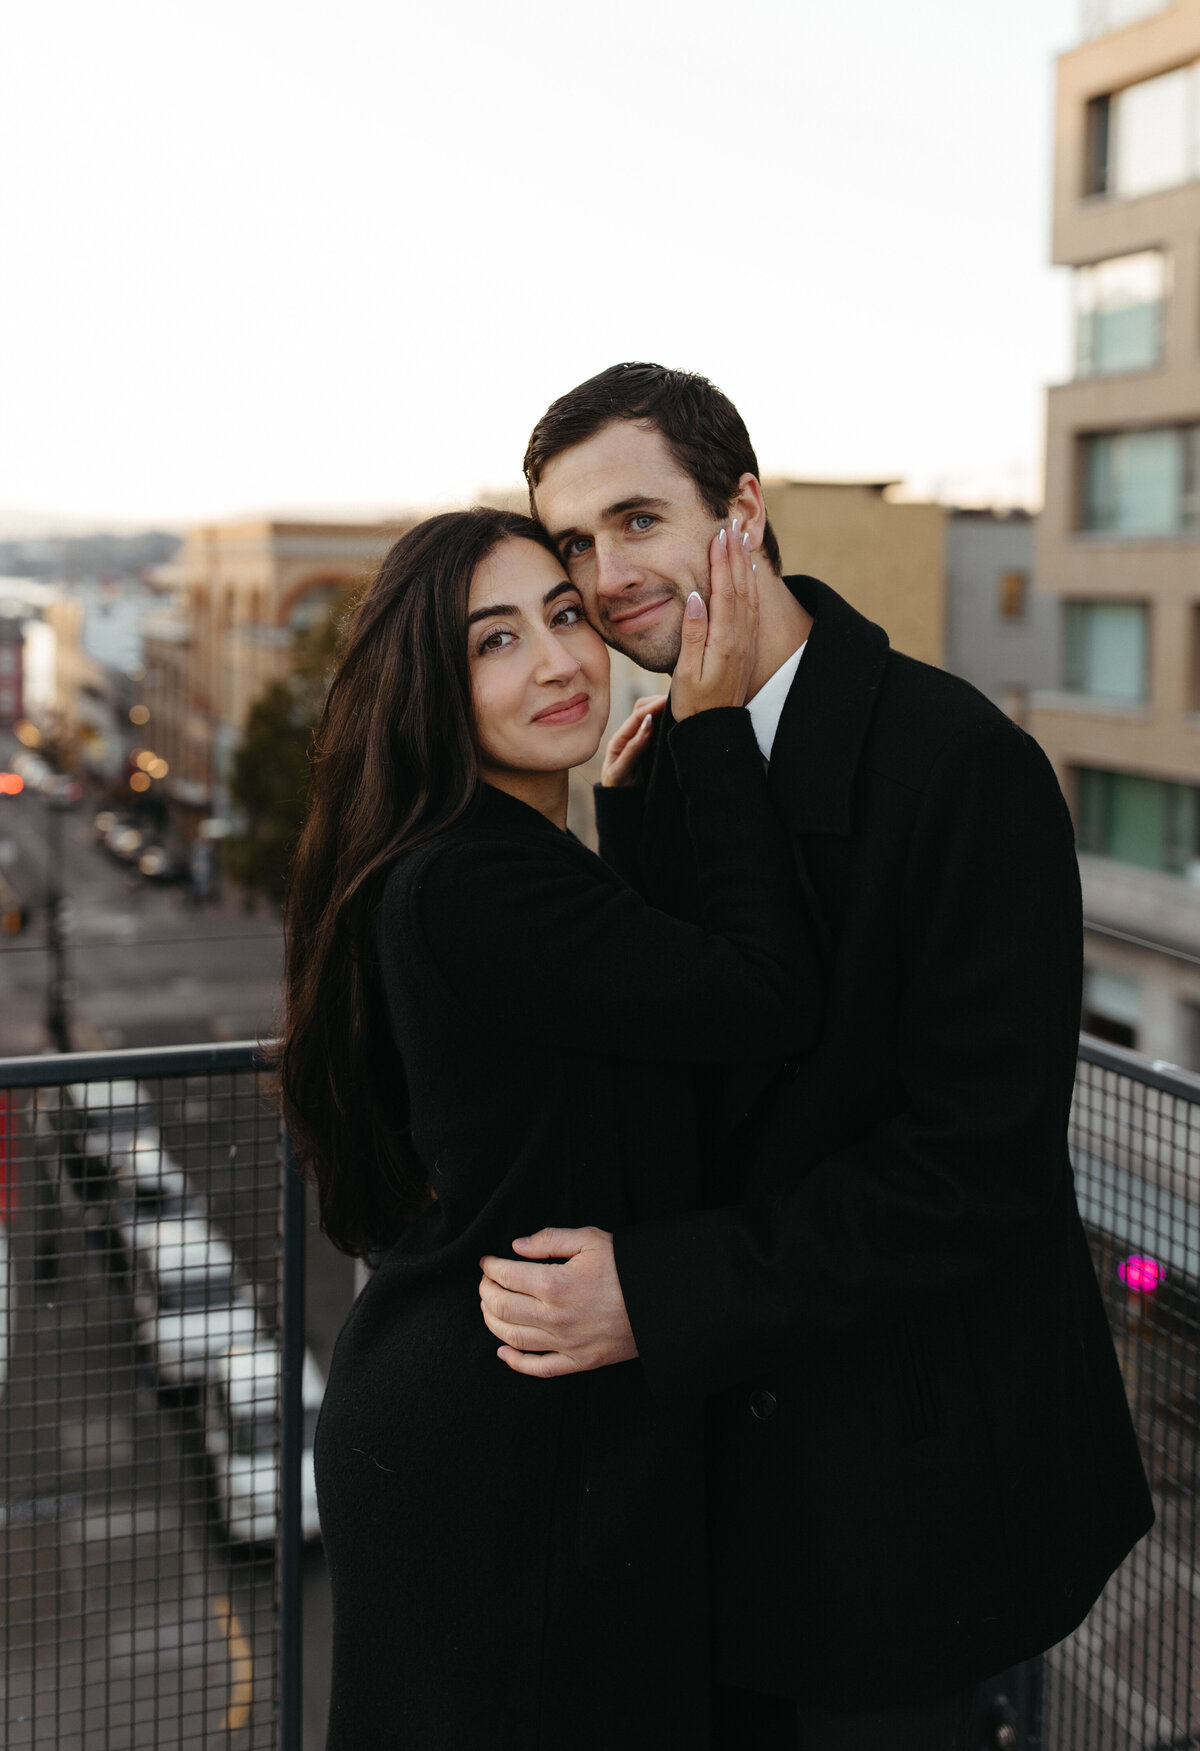 natalina&robbie_victoria_british_columbia_vancouver_island_downtown_rooftop_engagement_session_timeless_classy_elegant_old_money_sunset_stairs_romantic_couples_photos_photography_by_taiya321